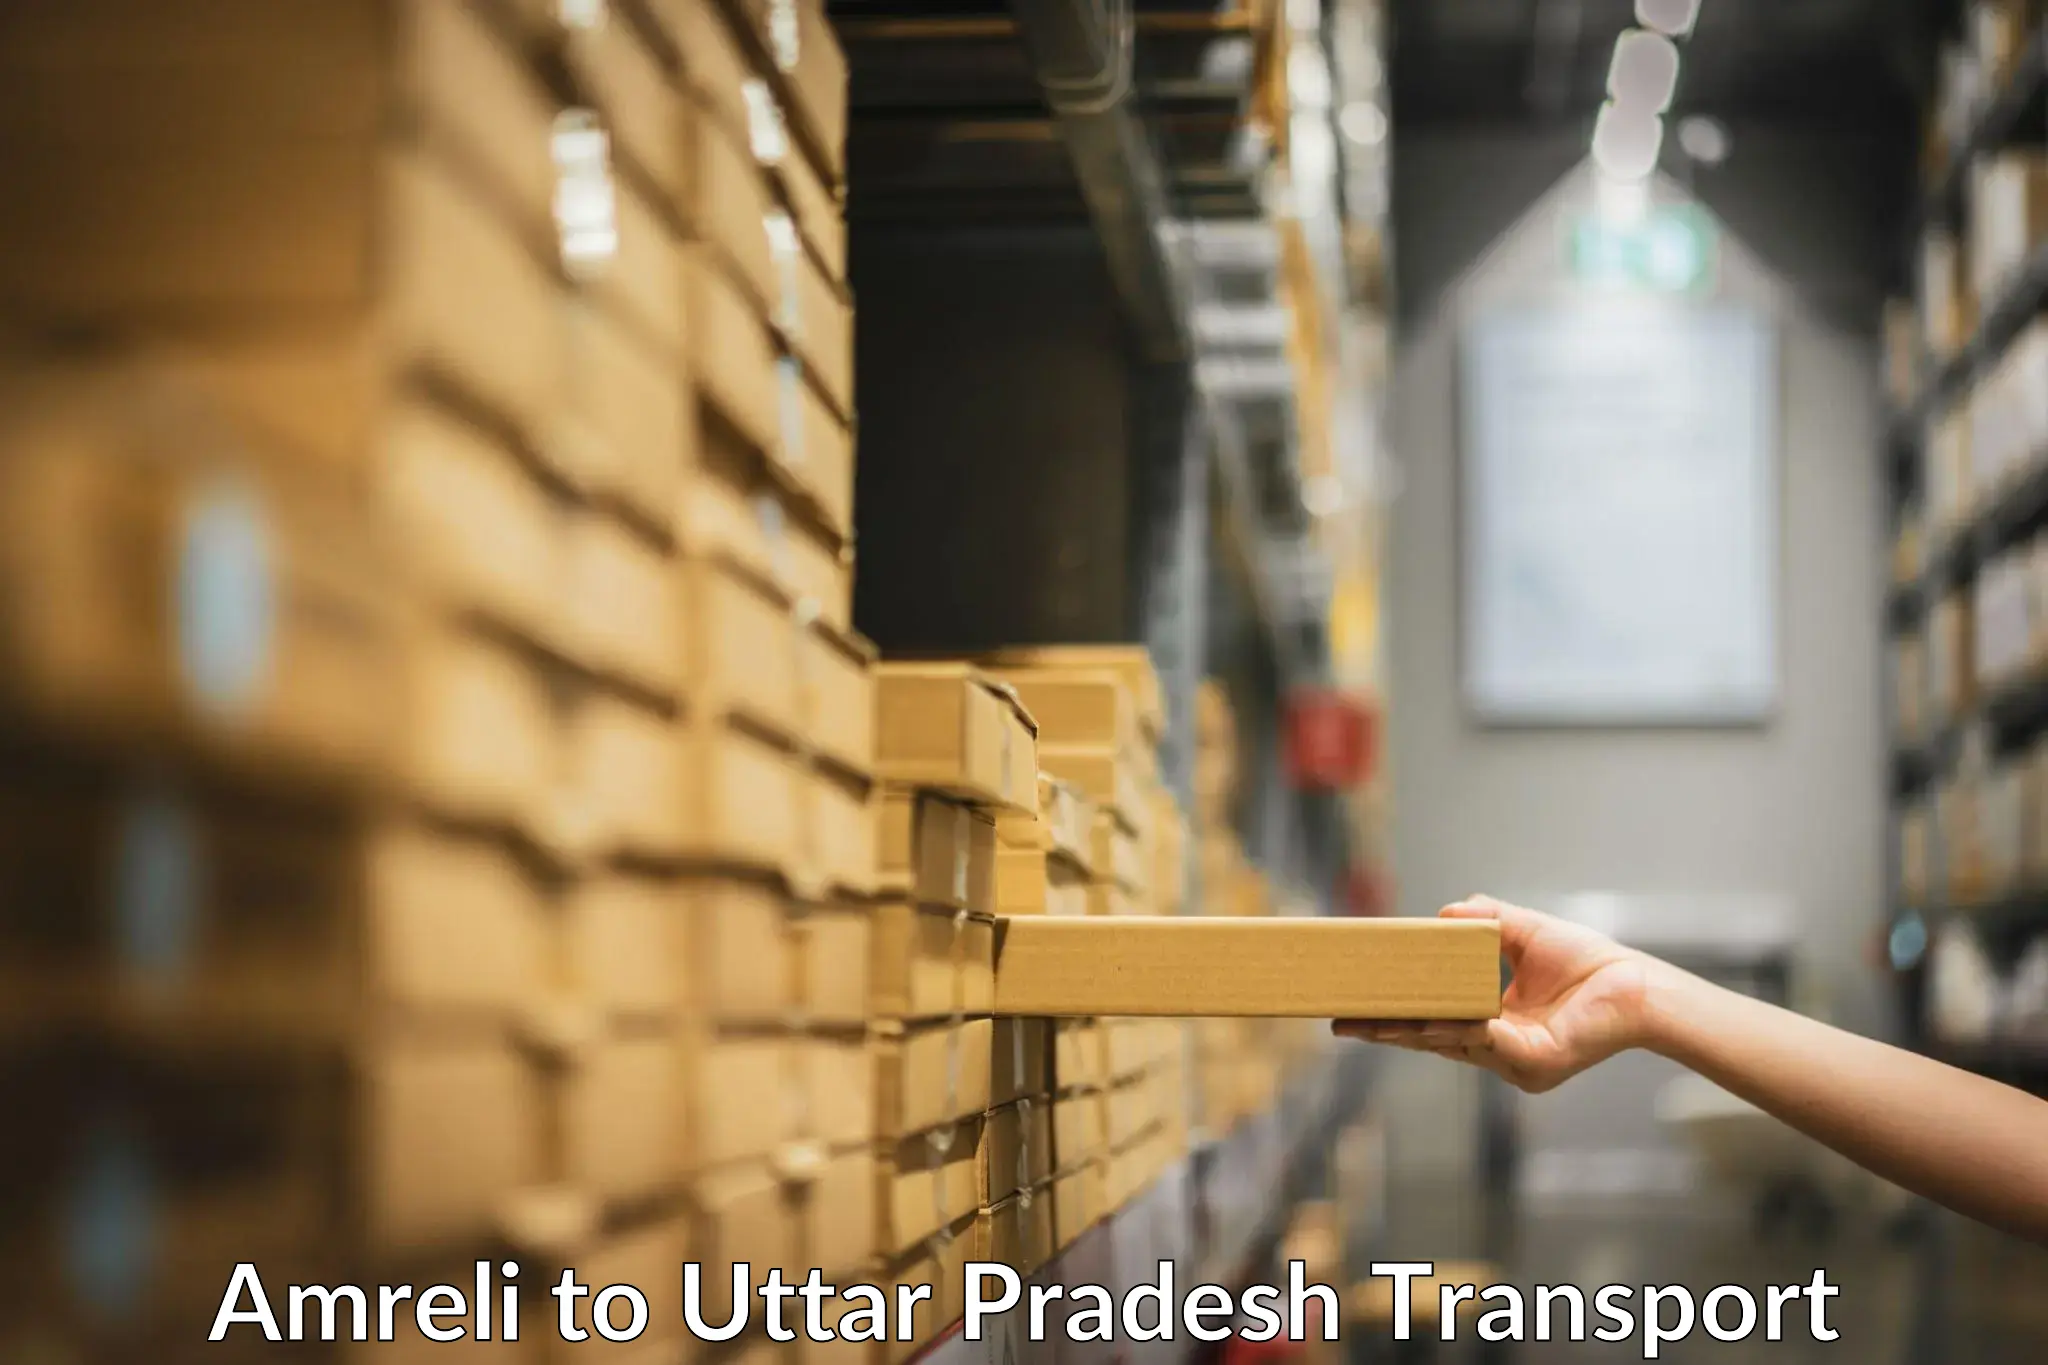 Domestic goods transportation services Amreli to Sitapur